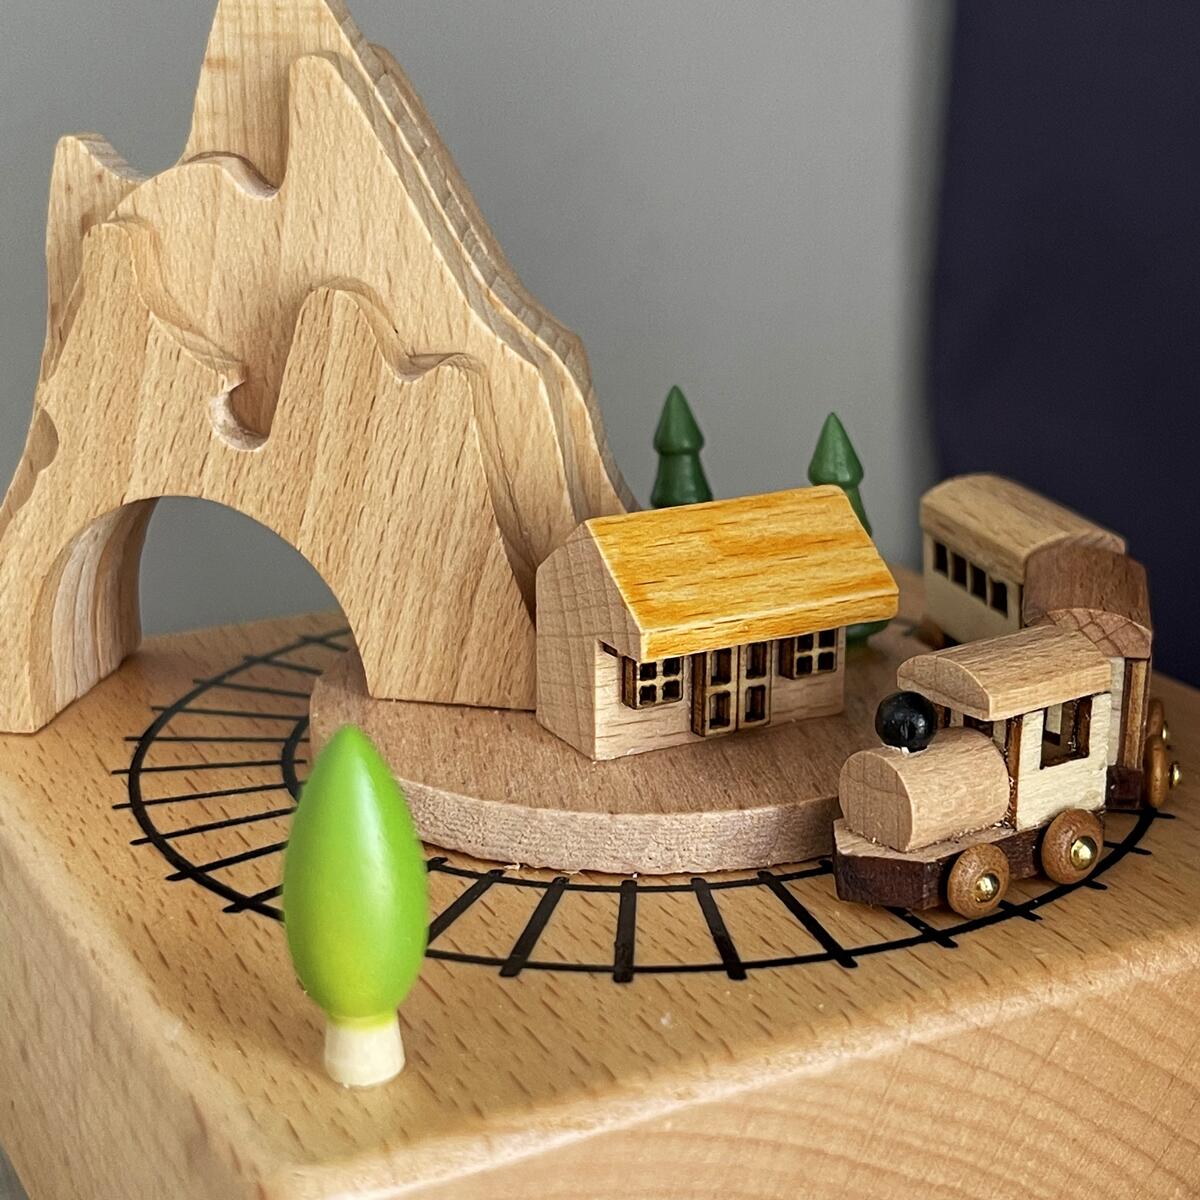 Mountain House with a Train in Motion (Melody Spirited Away)